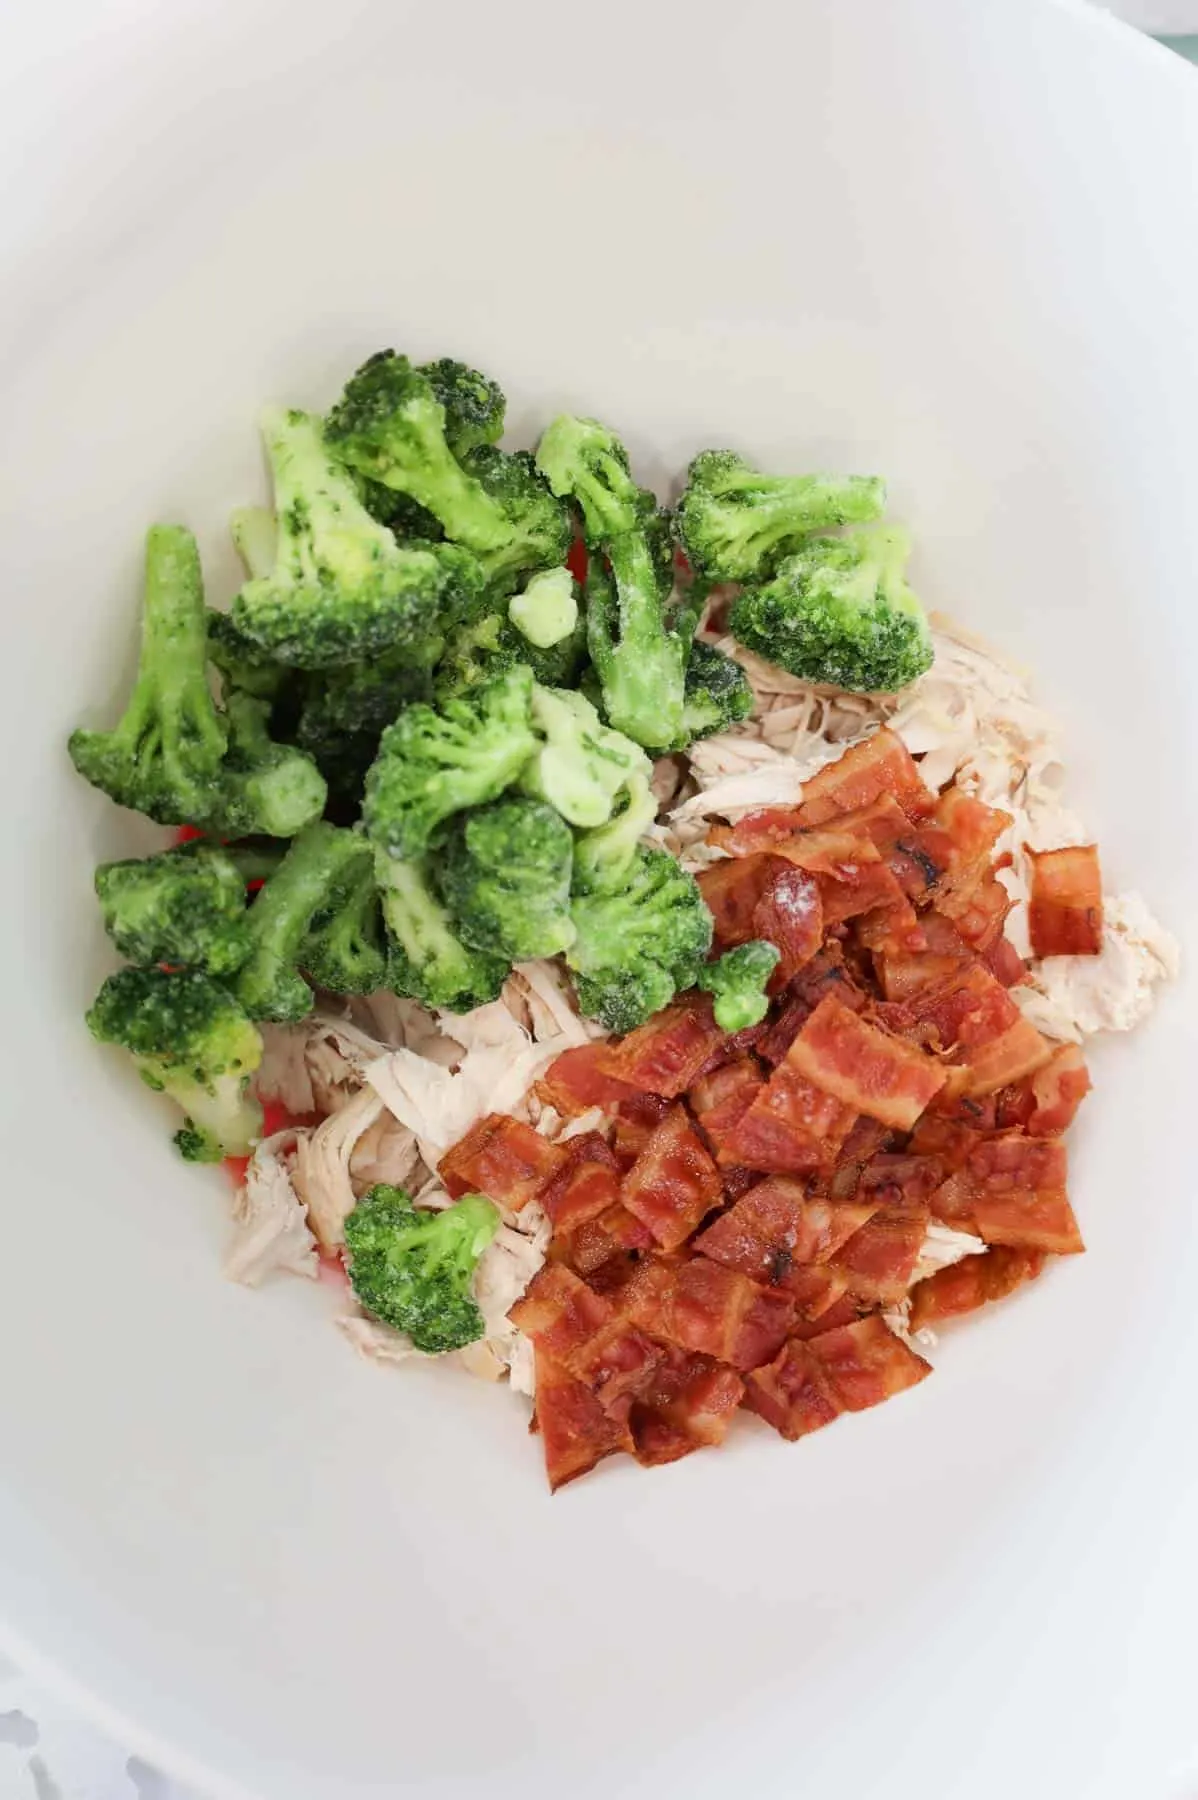 broccoli, shredded chicken and bacon pieces in a mixing bowl